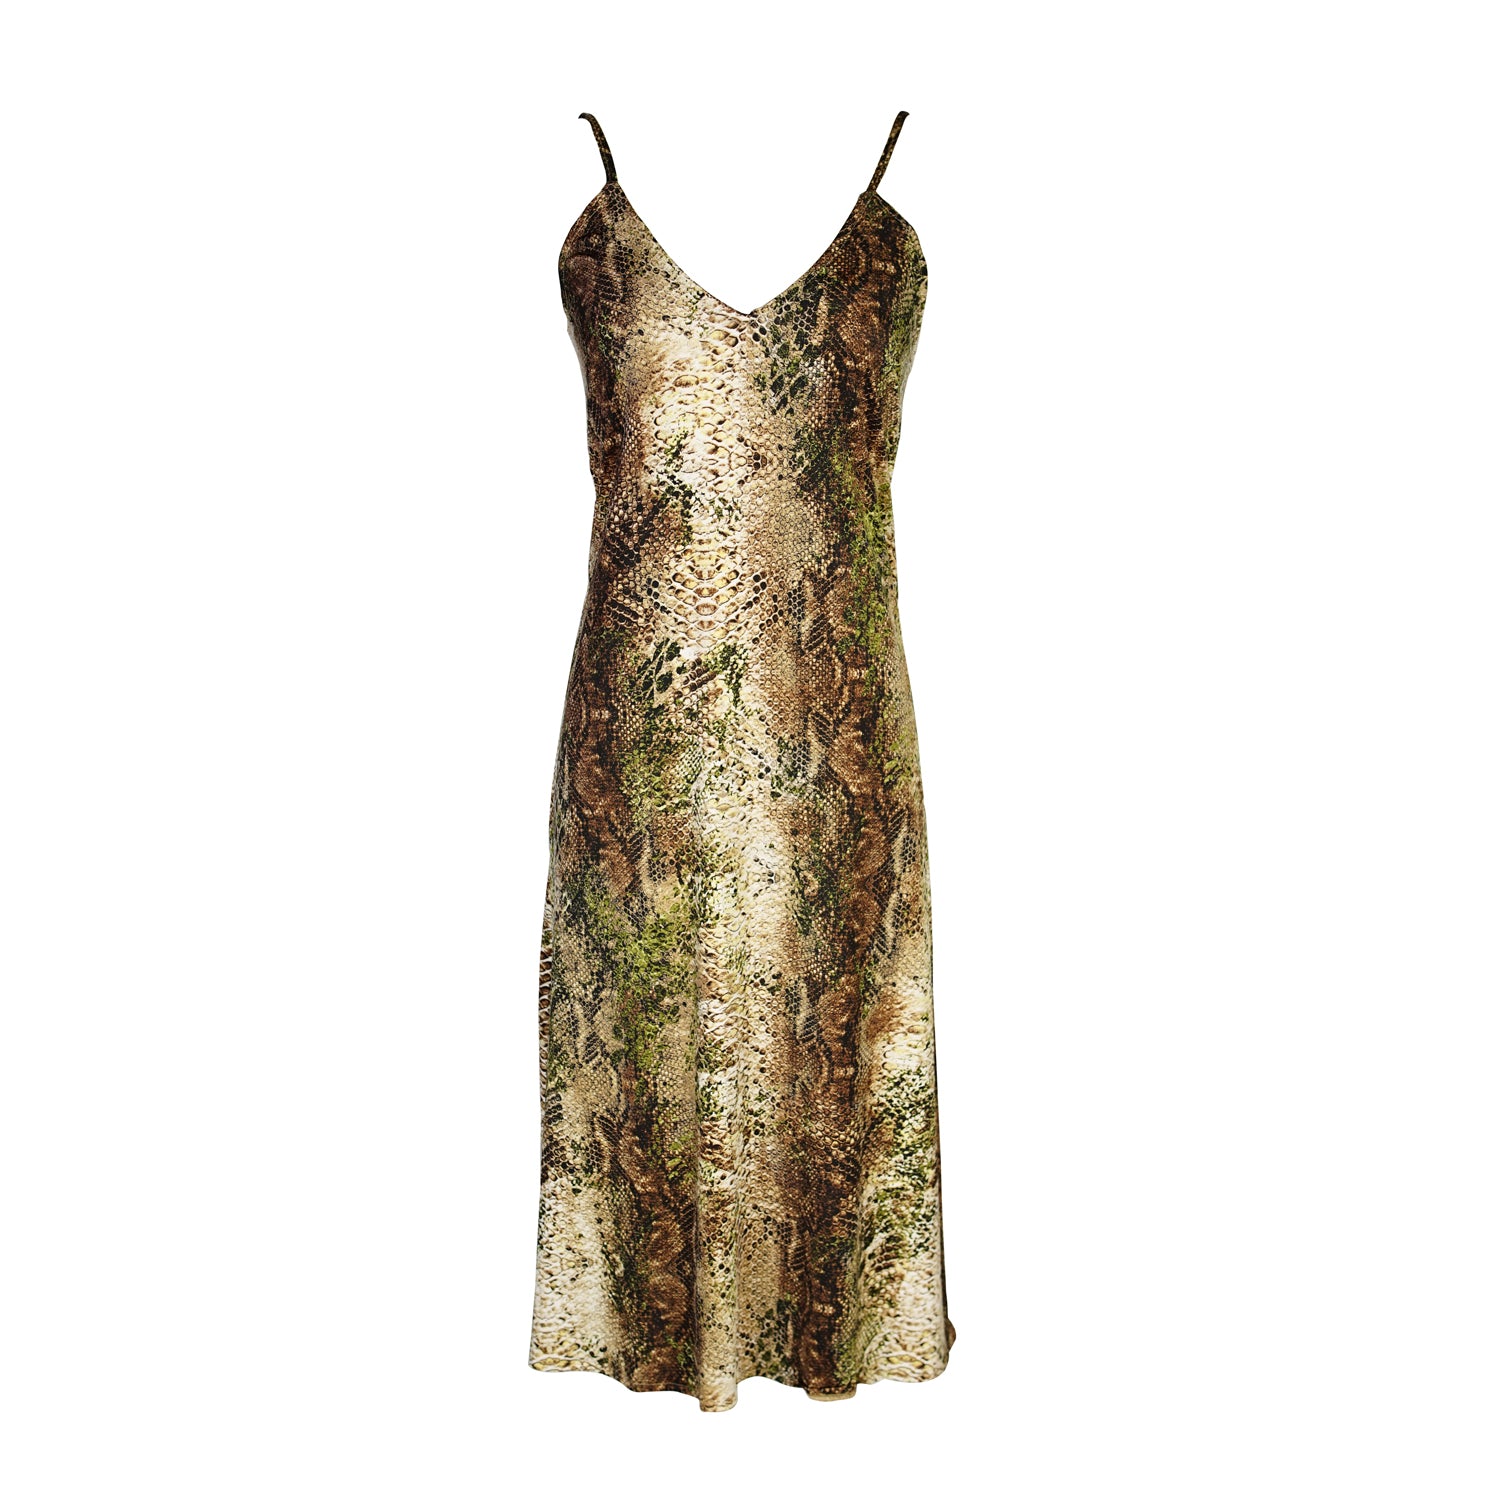 Midi slip dress with a soft beige base color, adorned with snakeskin pattern featuring shades of green and brown. It features slender straps with a straight silhouette and relaxed fix, allowing for a beautiful drape and flowy movement. It's designed for a light, airy feel, suitable for warm weather or layered for cooler days.